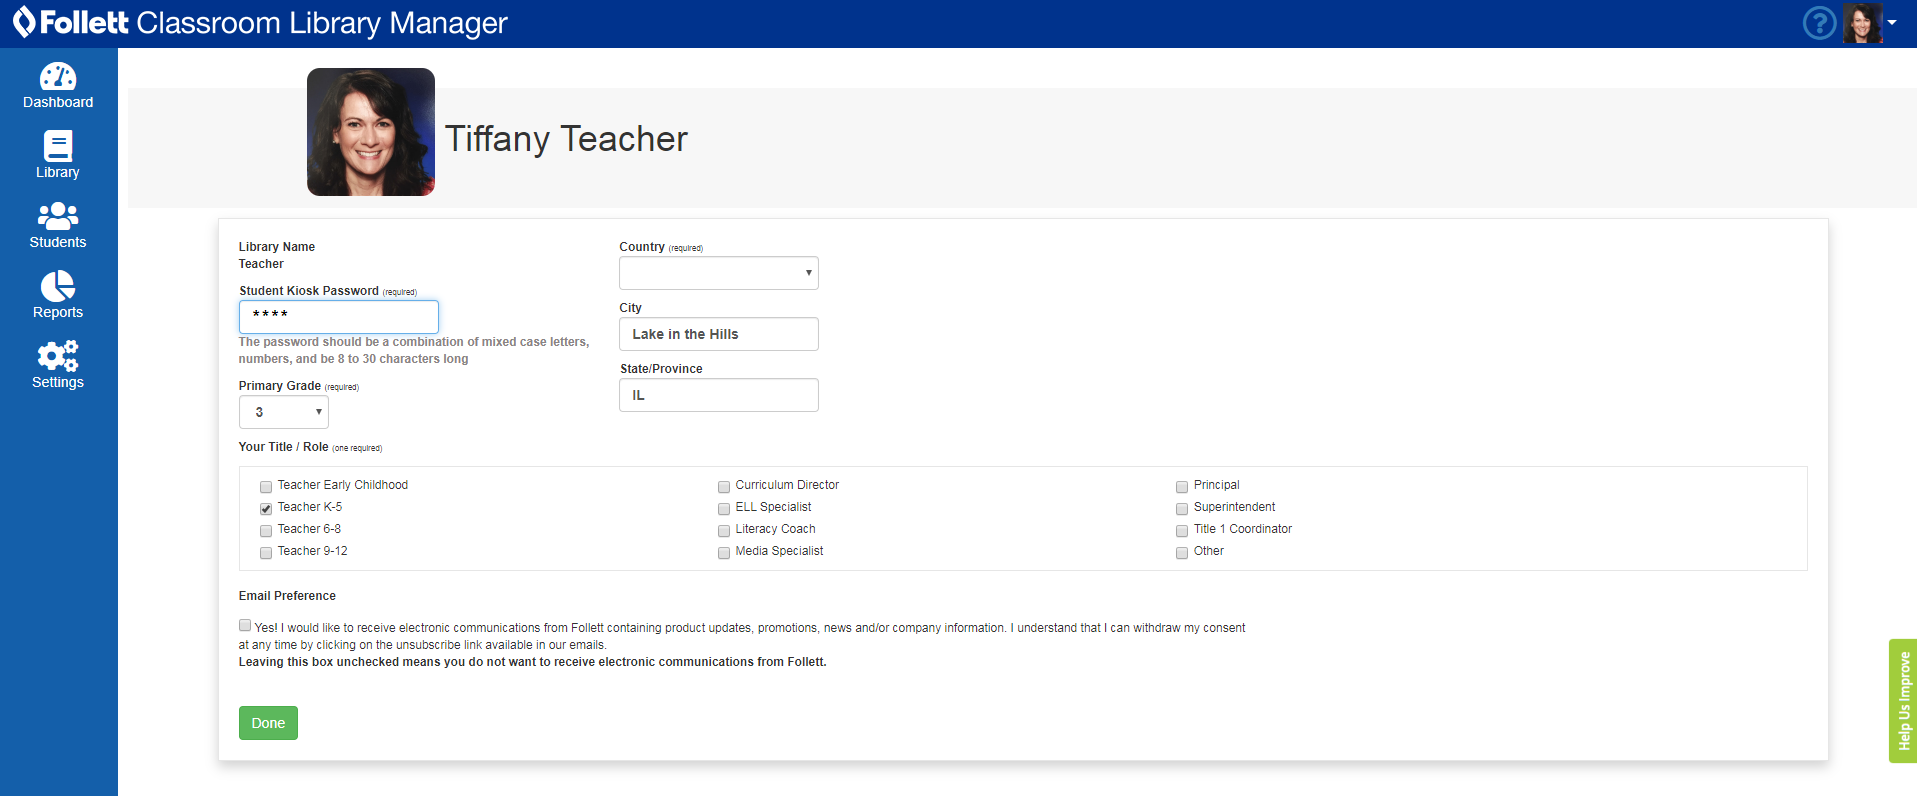 User profile page with details such as library name, grade and title.